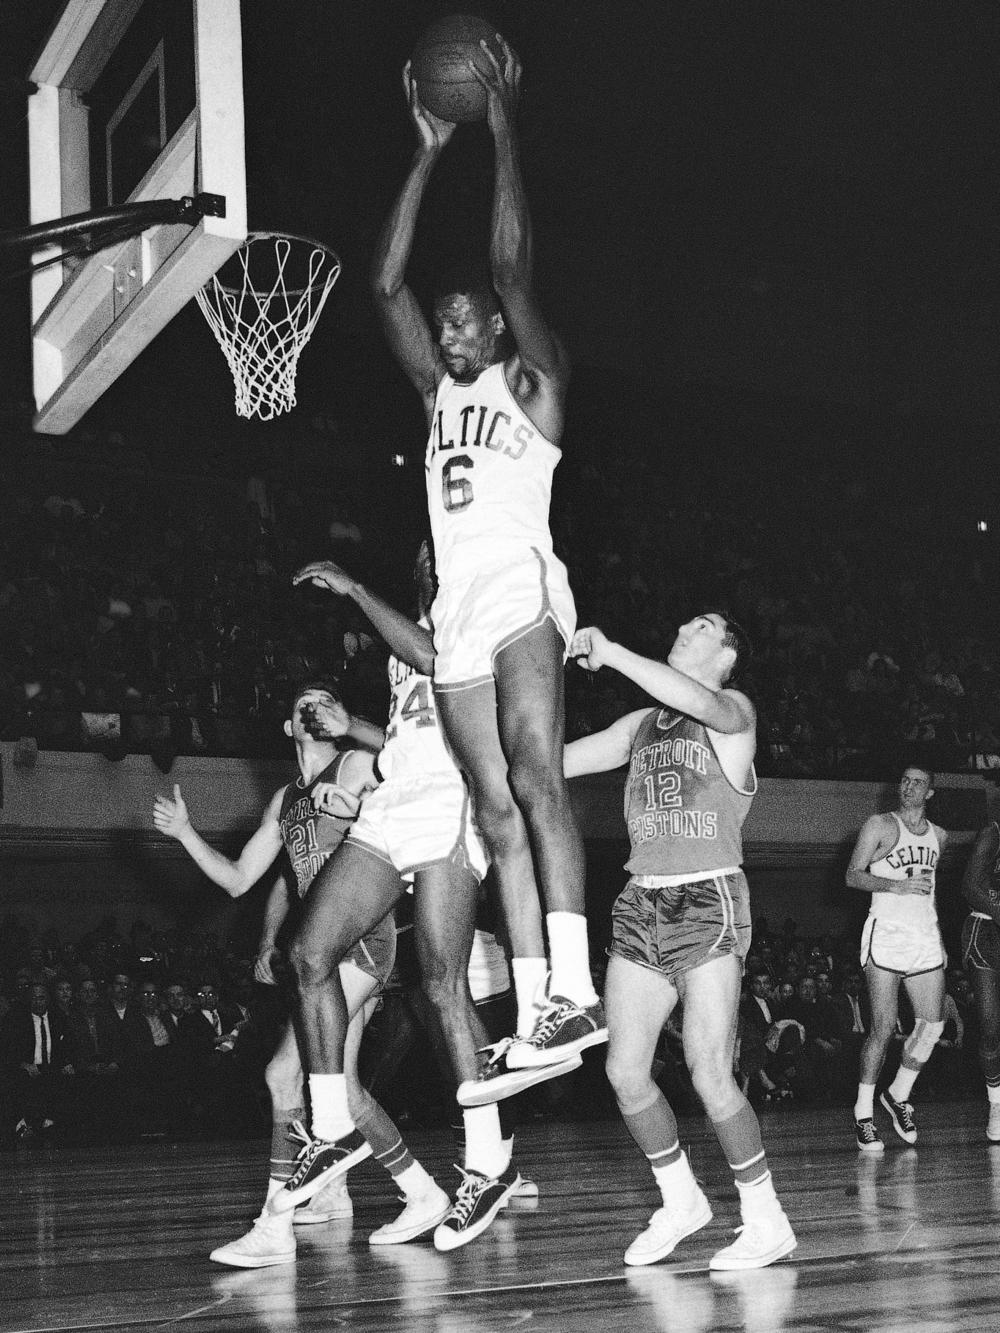 Russell soars to grab a rebound against the Detroit Pistons in 1961. Russell revolutionized basketball with his high-flying defense and prolific shot-blocking. 